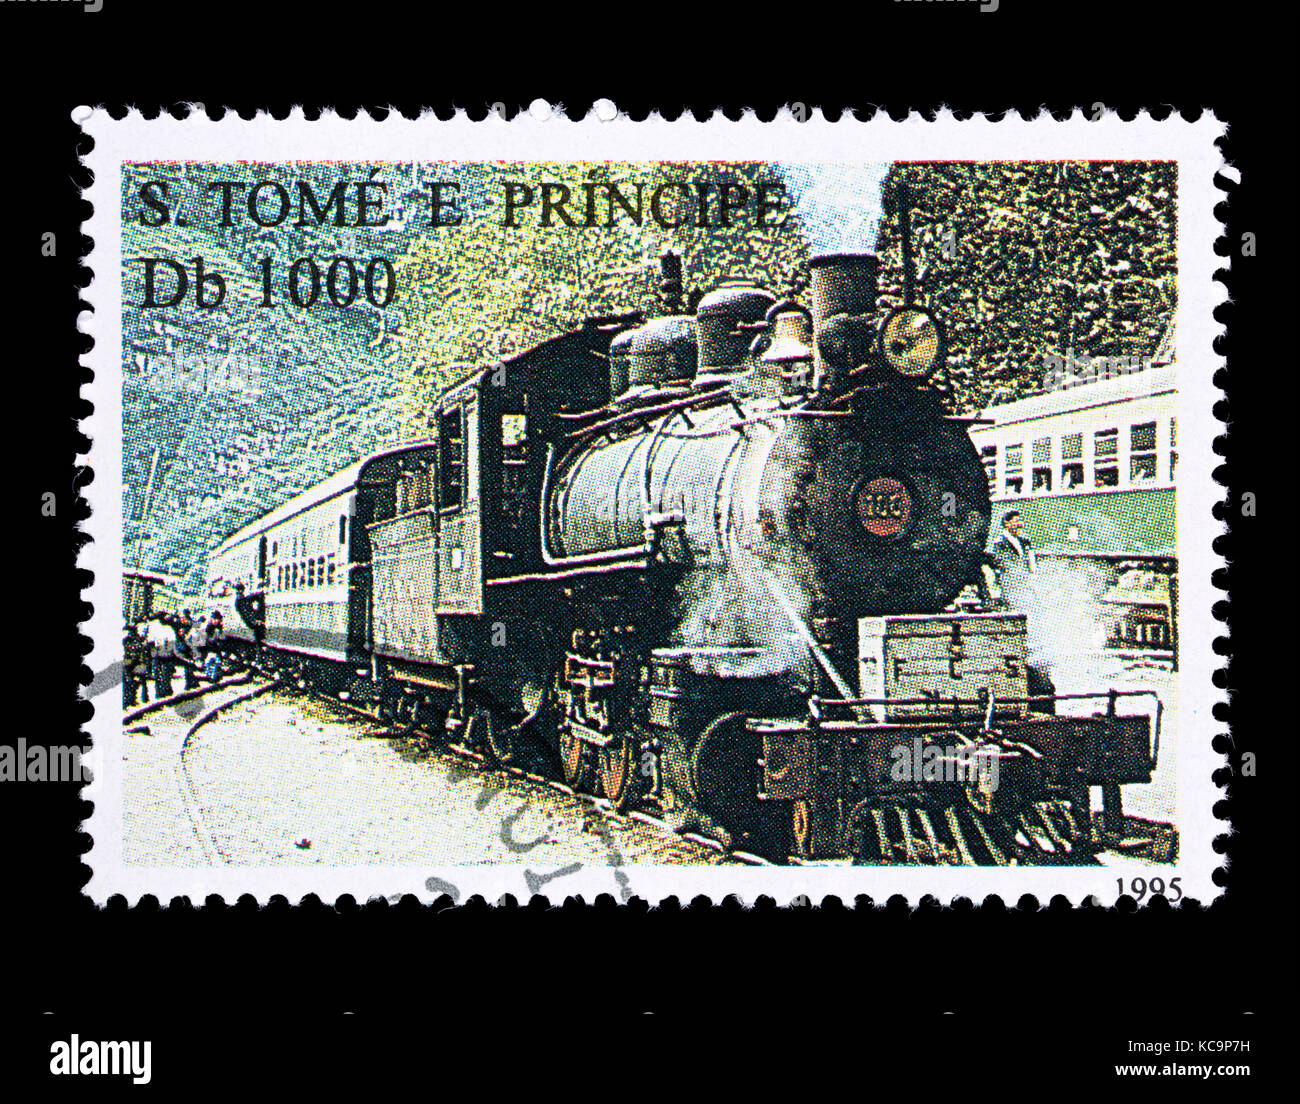 Postage stamp from Saint Thomas and Prince Islands depicting a Filipino steam locomotive and tender with passenger cars. Stock Photo